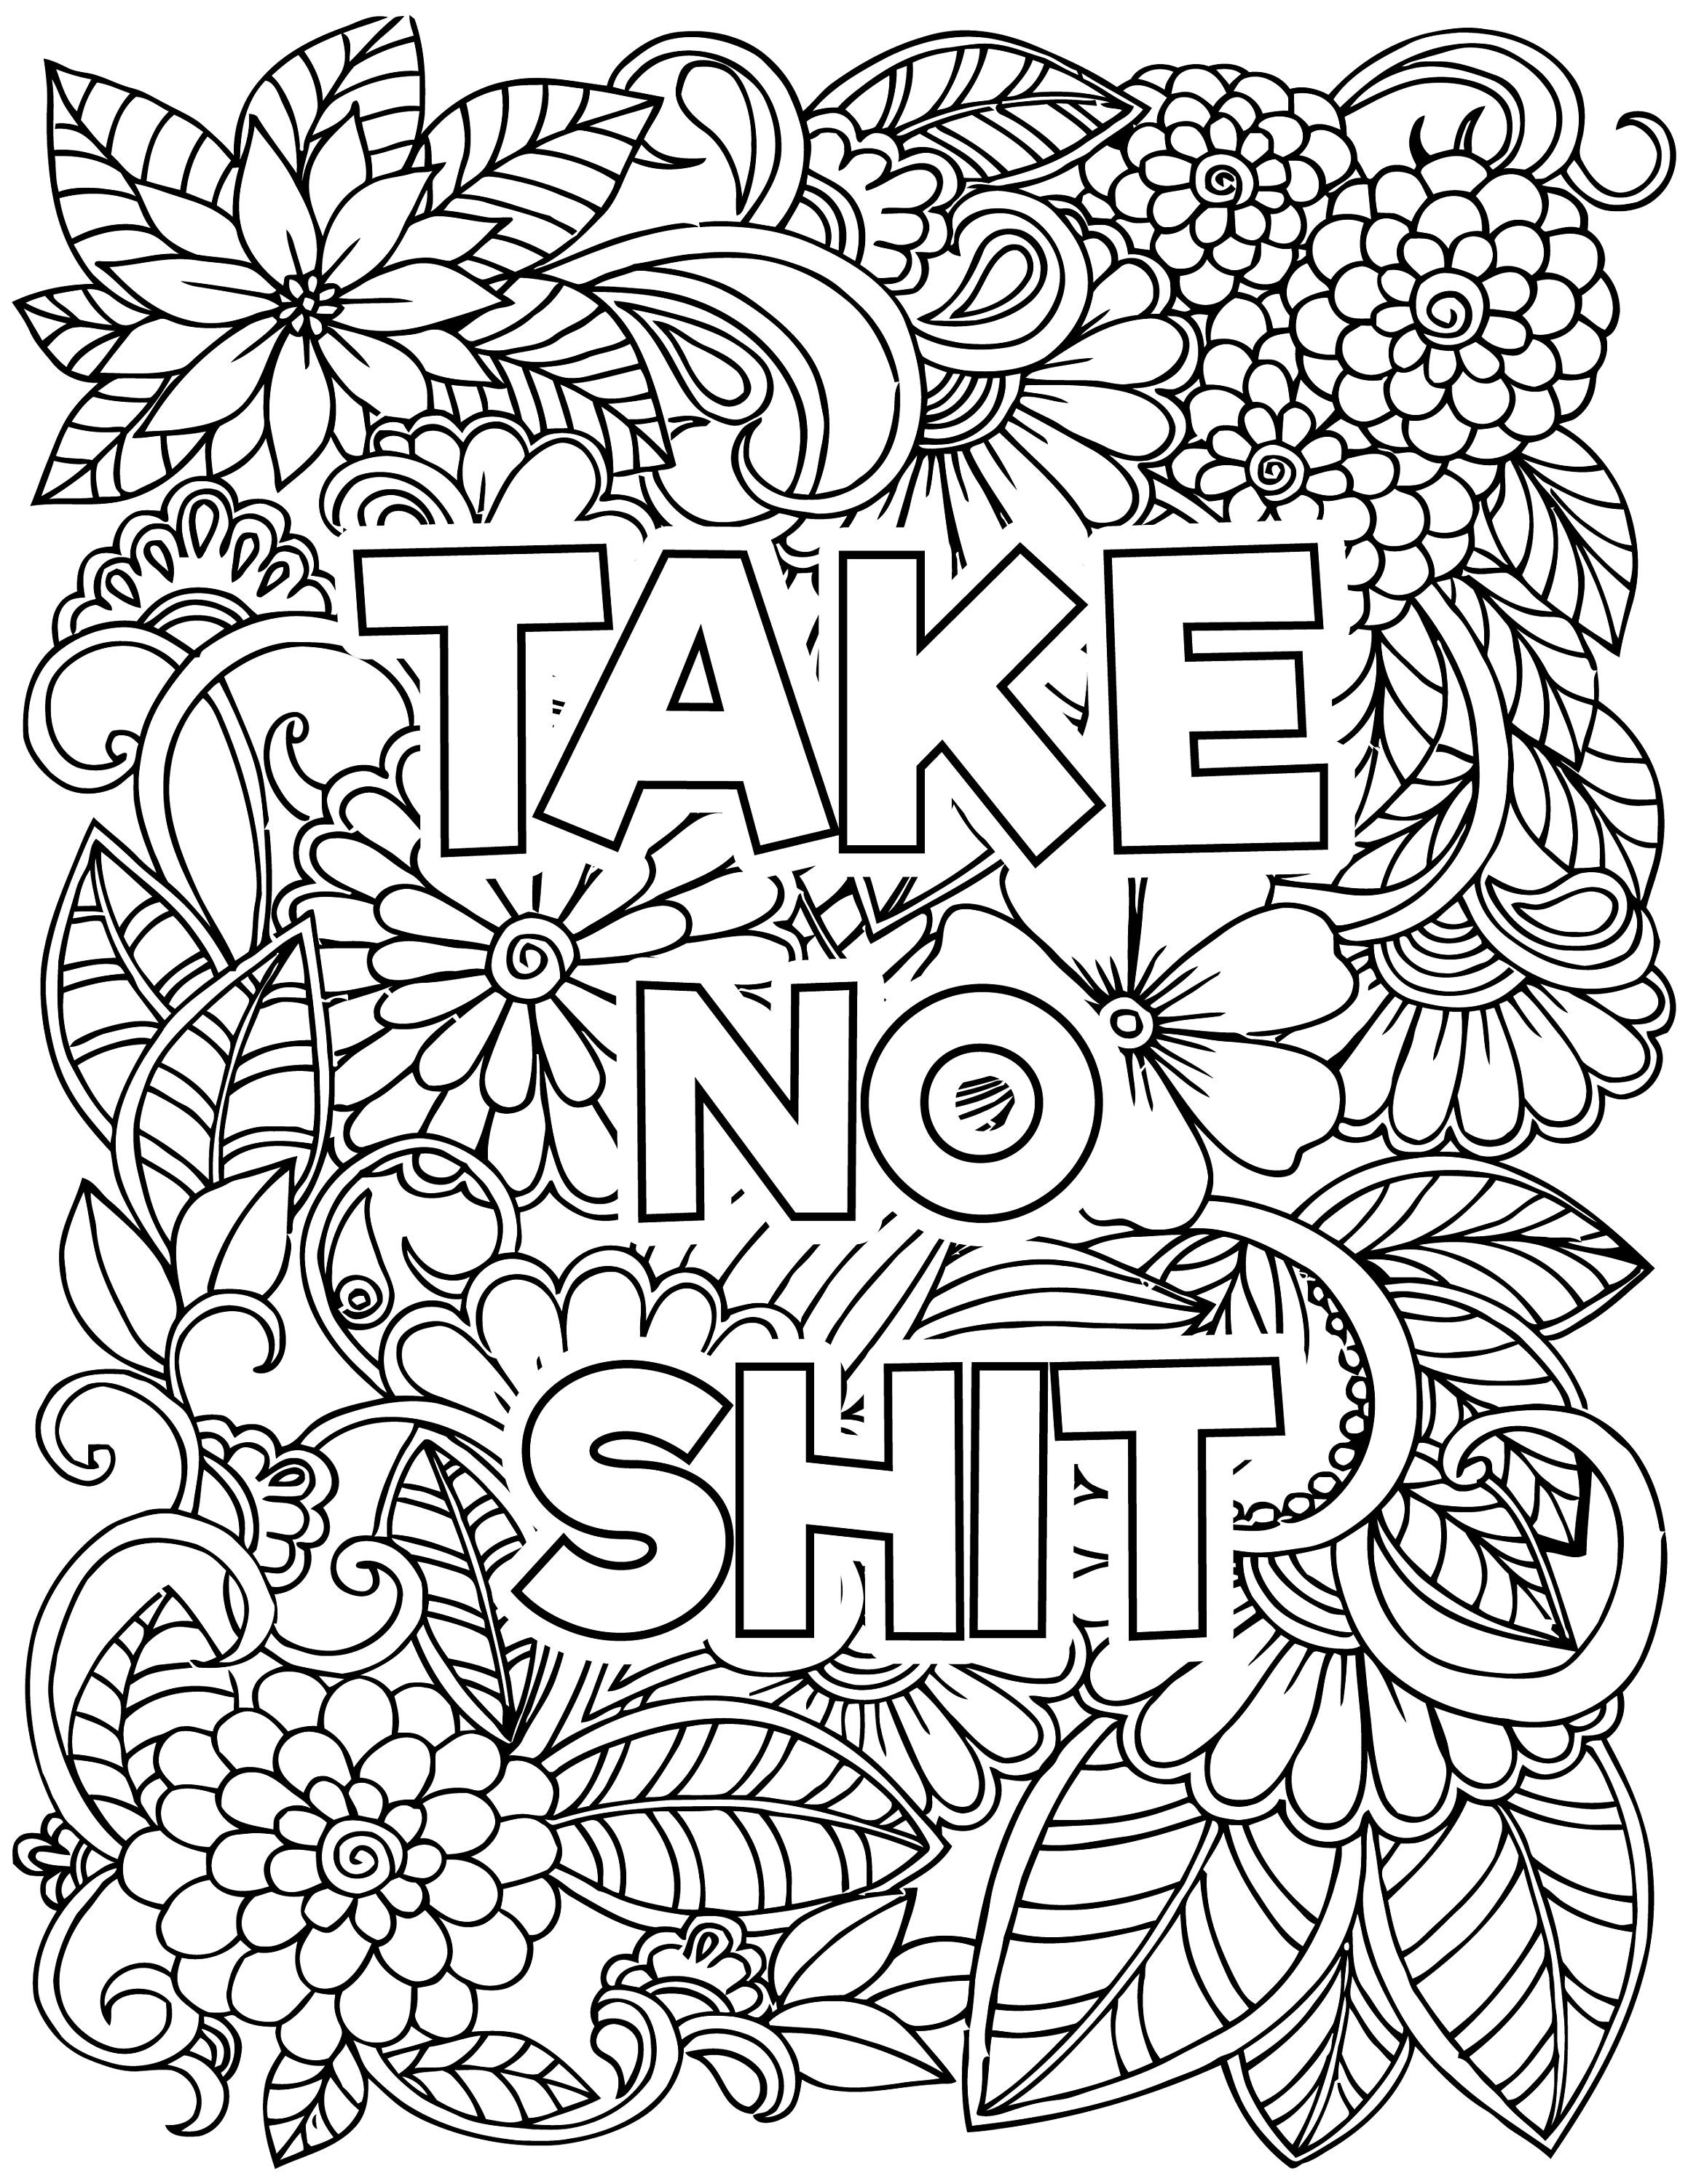 Adult Swear Word Coloring Pages Adult Coloring Book With Swear Words 8 Pages  